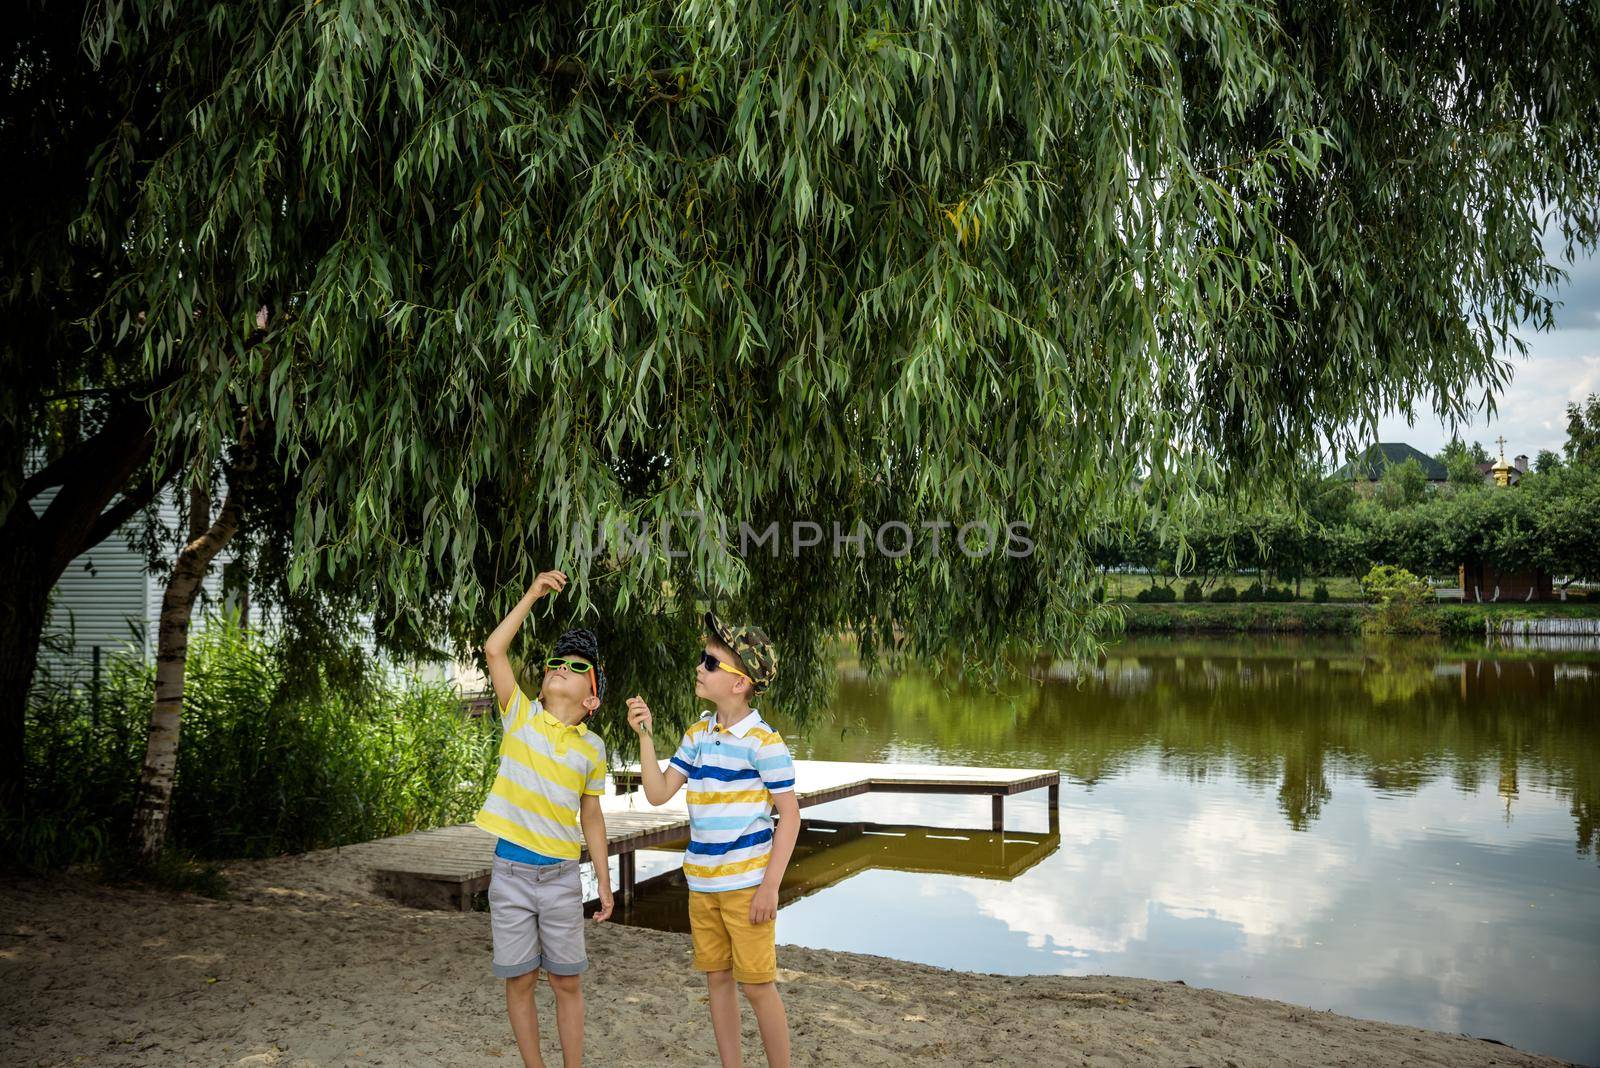 Siblings, brother, hugs. Two children, older boy and his younger brother standing on the shore of the lake near old tree. Summertime holiday concept leisure time on nature.